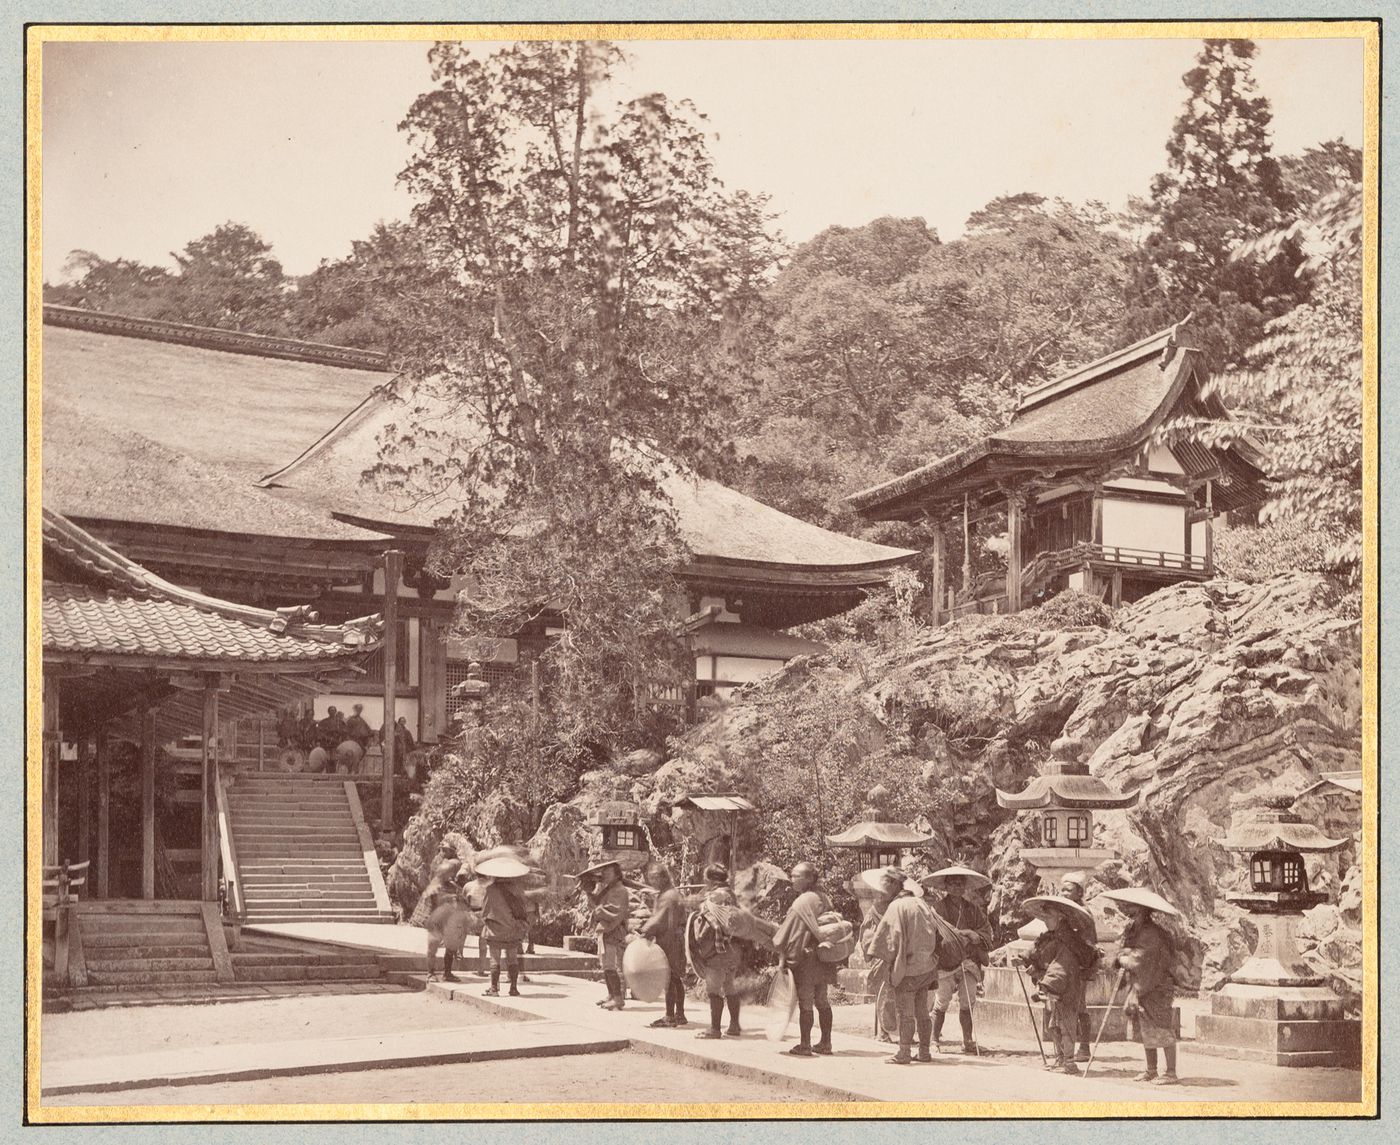 View of the Ishiyamadera Temple complex showing buildings, stairs, stone lanterns and people, Otsu-shi, Shiga-ken, Japan